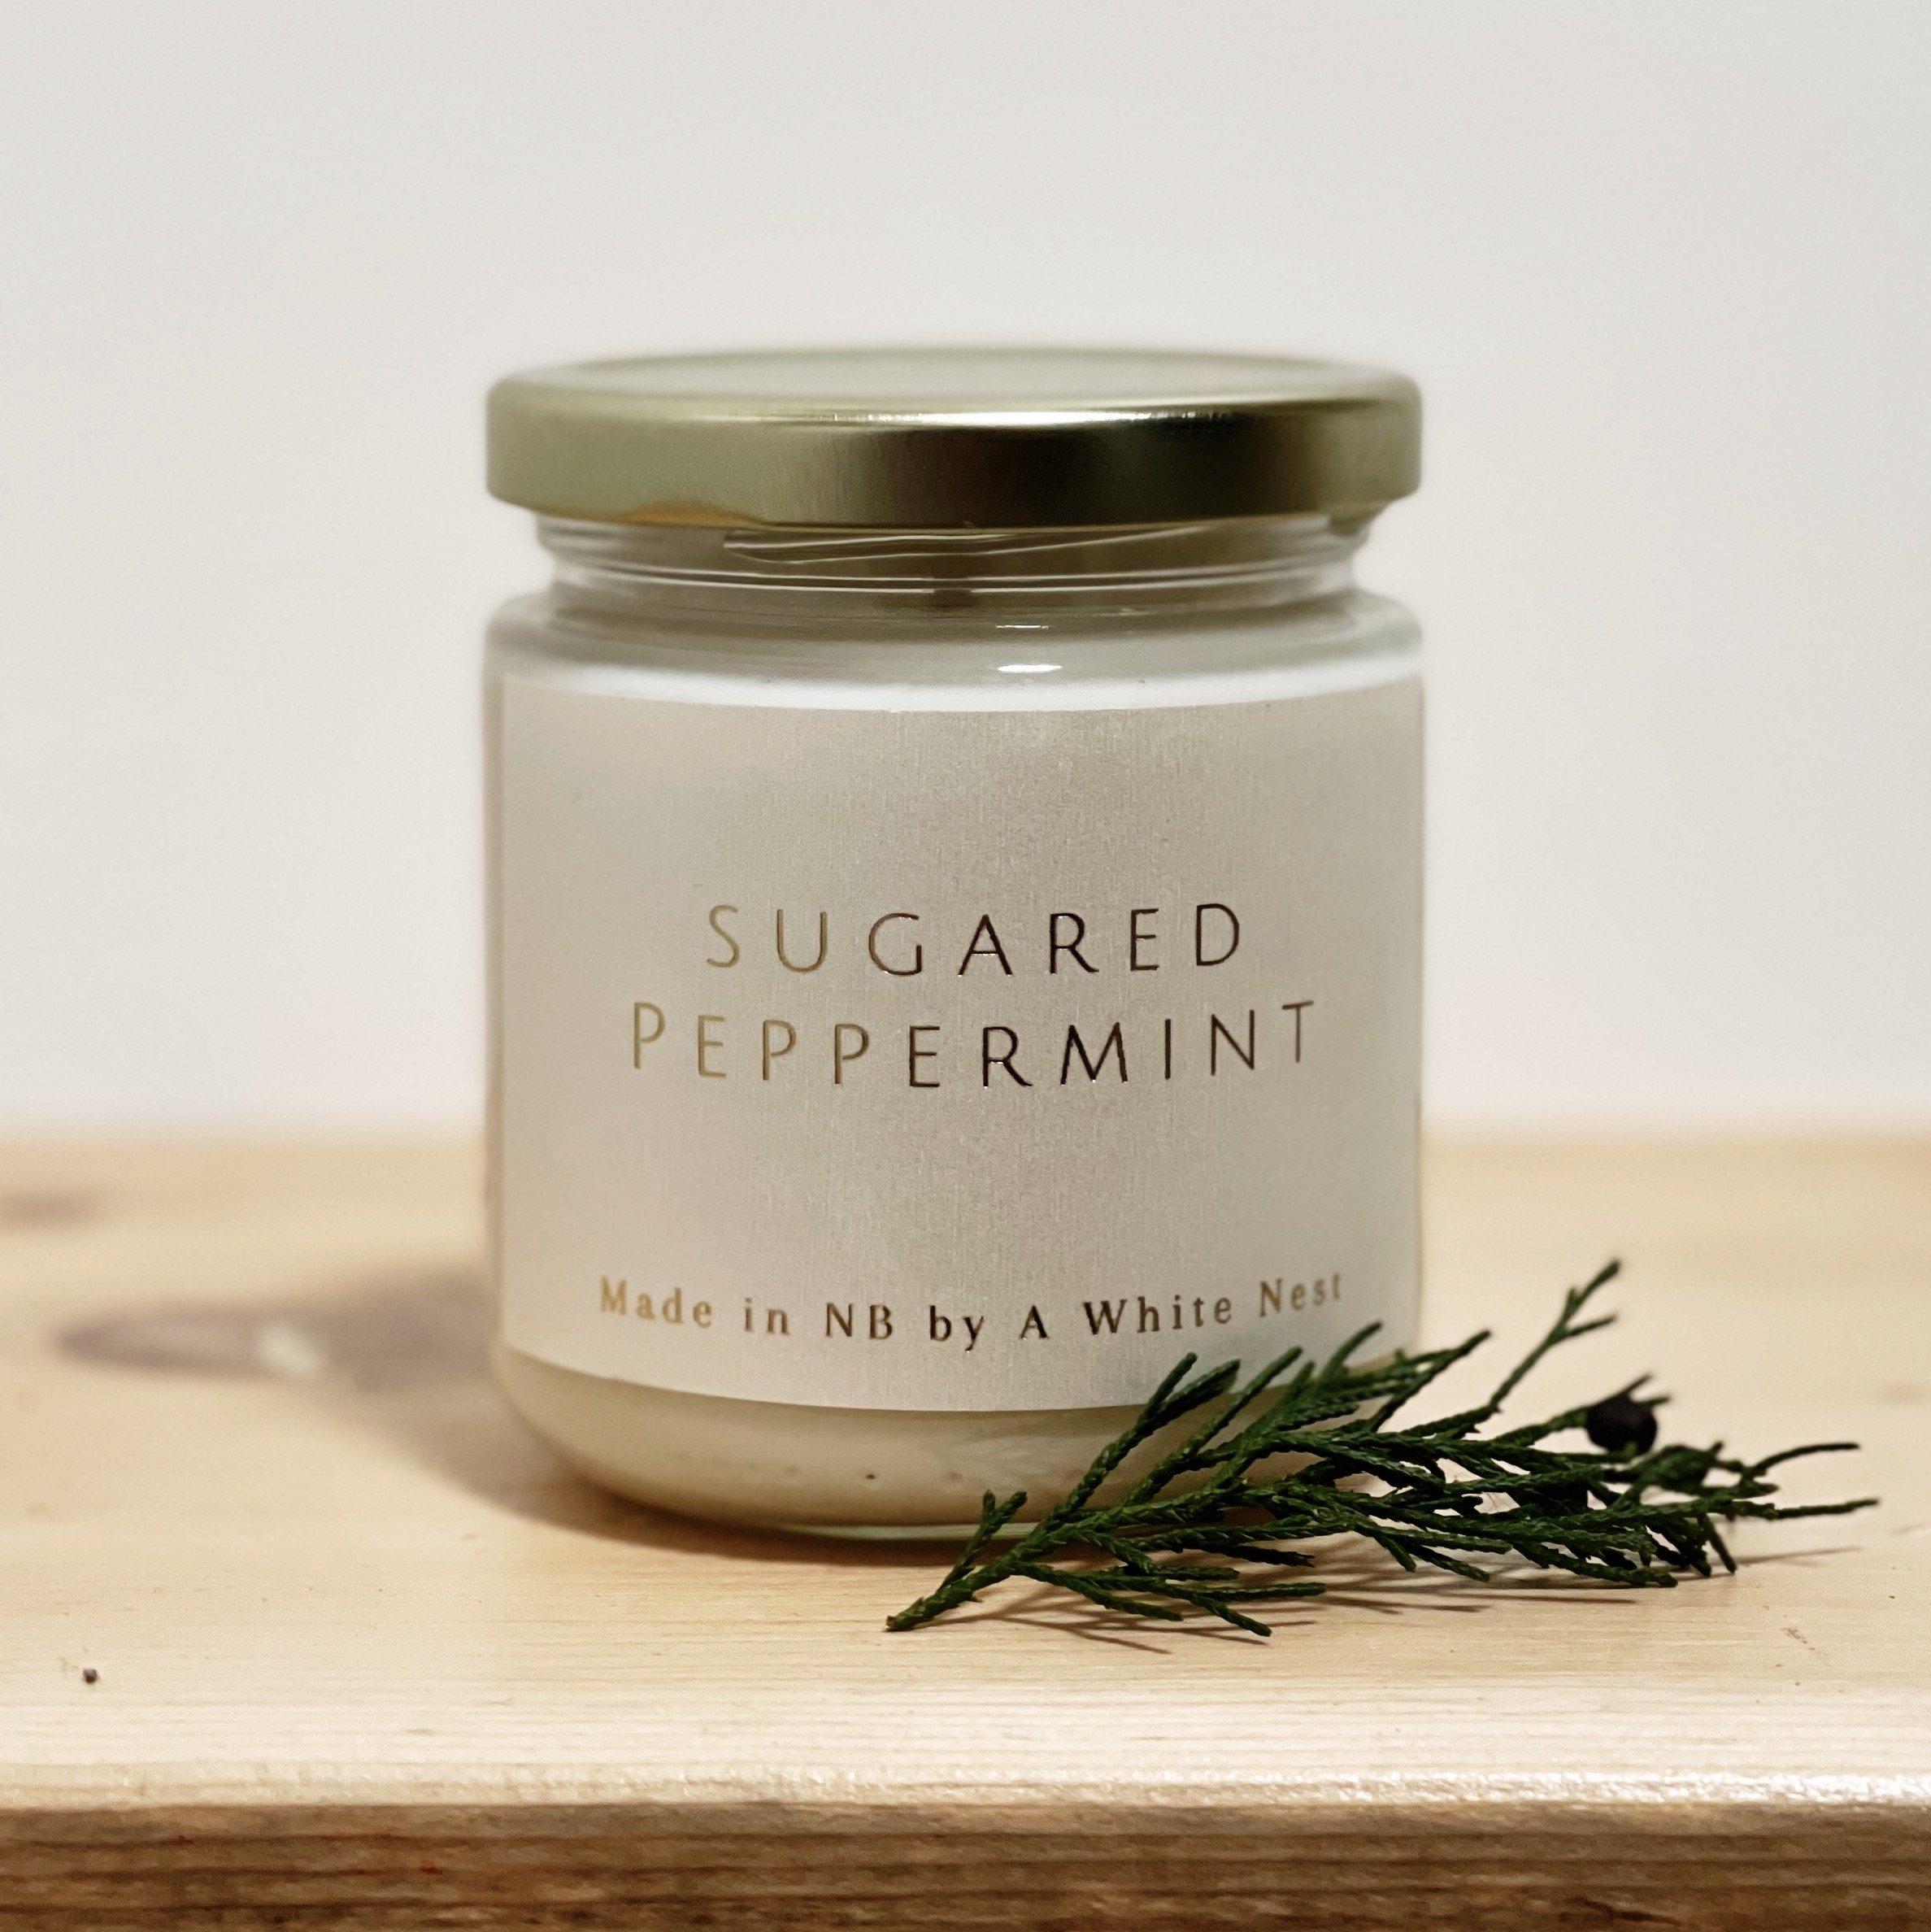 Sugared Peppermint Scented Candle - $20.00